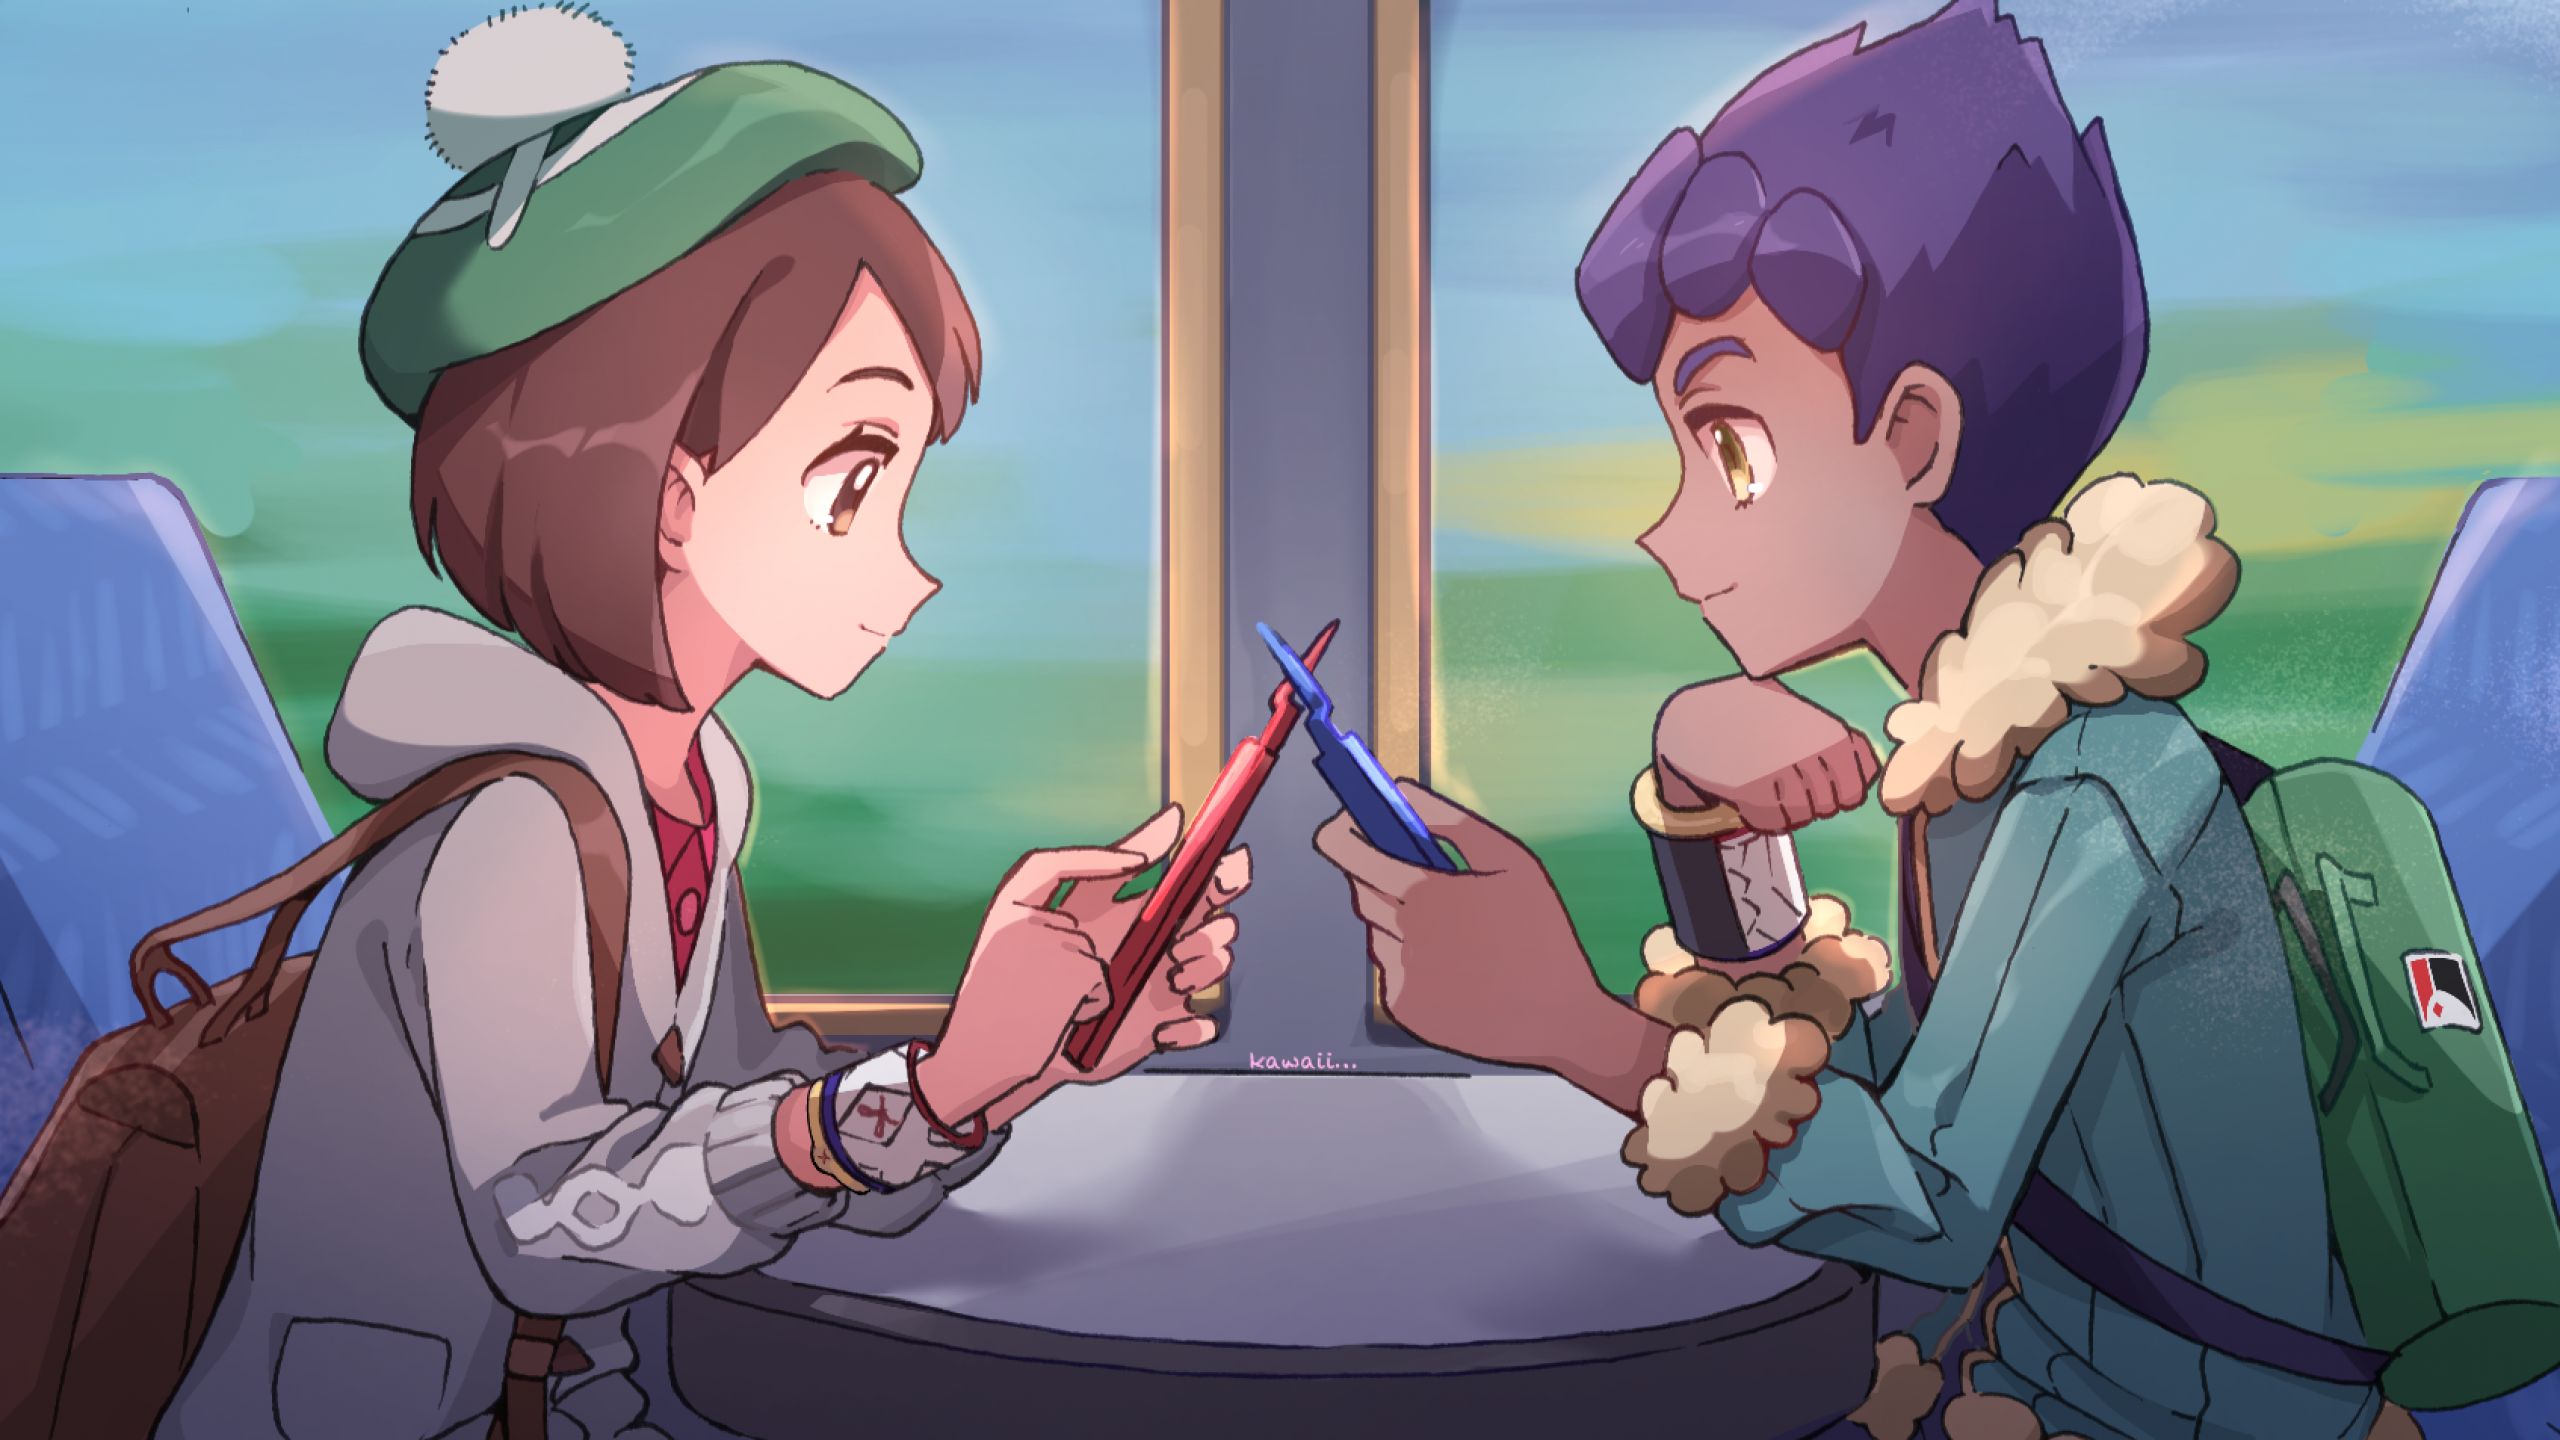 video game, pokémon: sword and shield, brown hair, gloria (pokémon), hop (pokémon), pokémon, purple hair